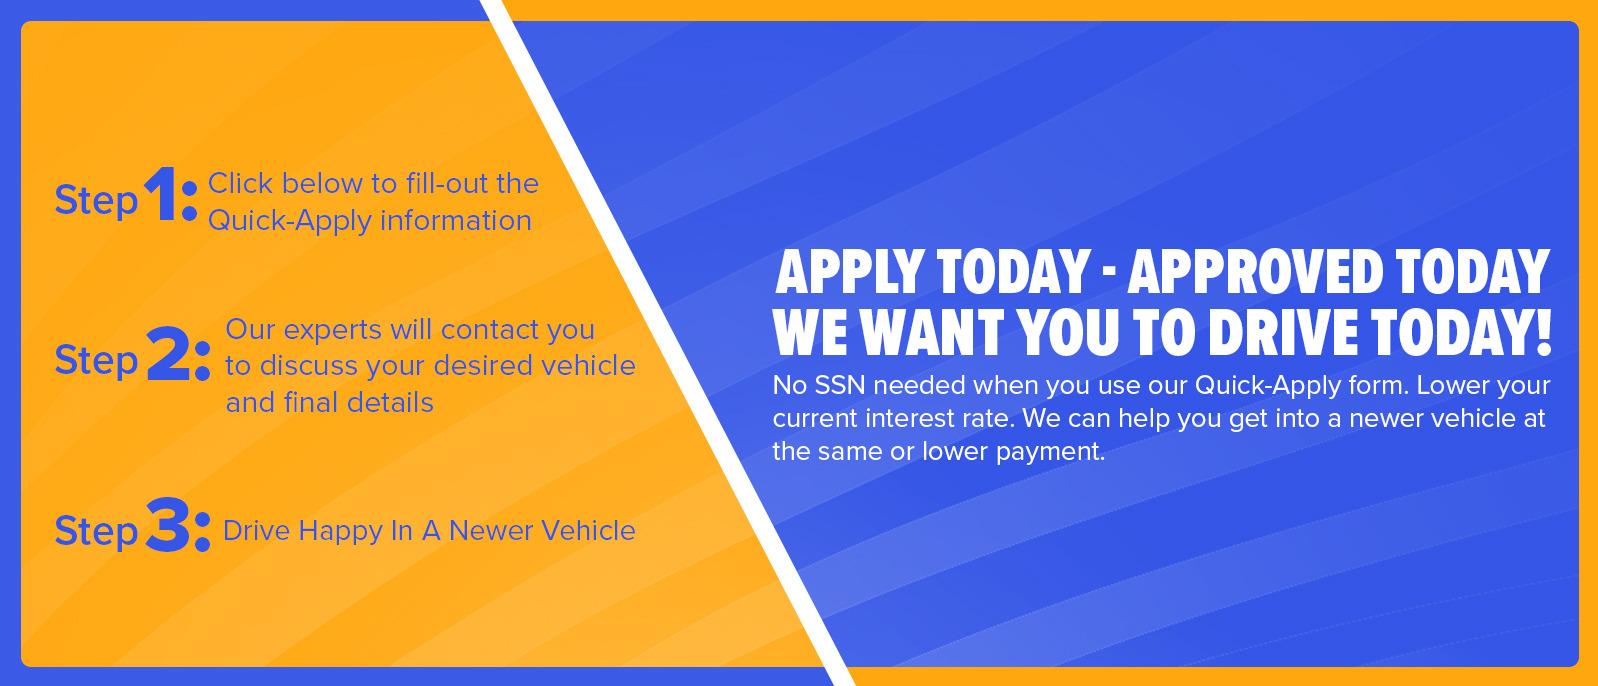 APPLY TODAY. APPROVED TODAY. WE WANT YOU TO DRIVE TODAY!